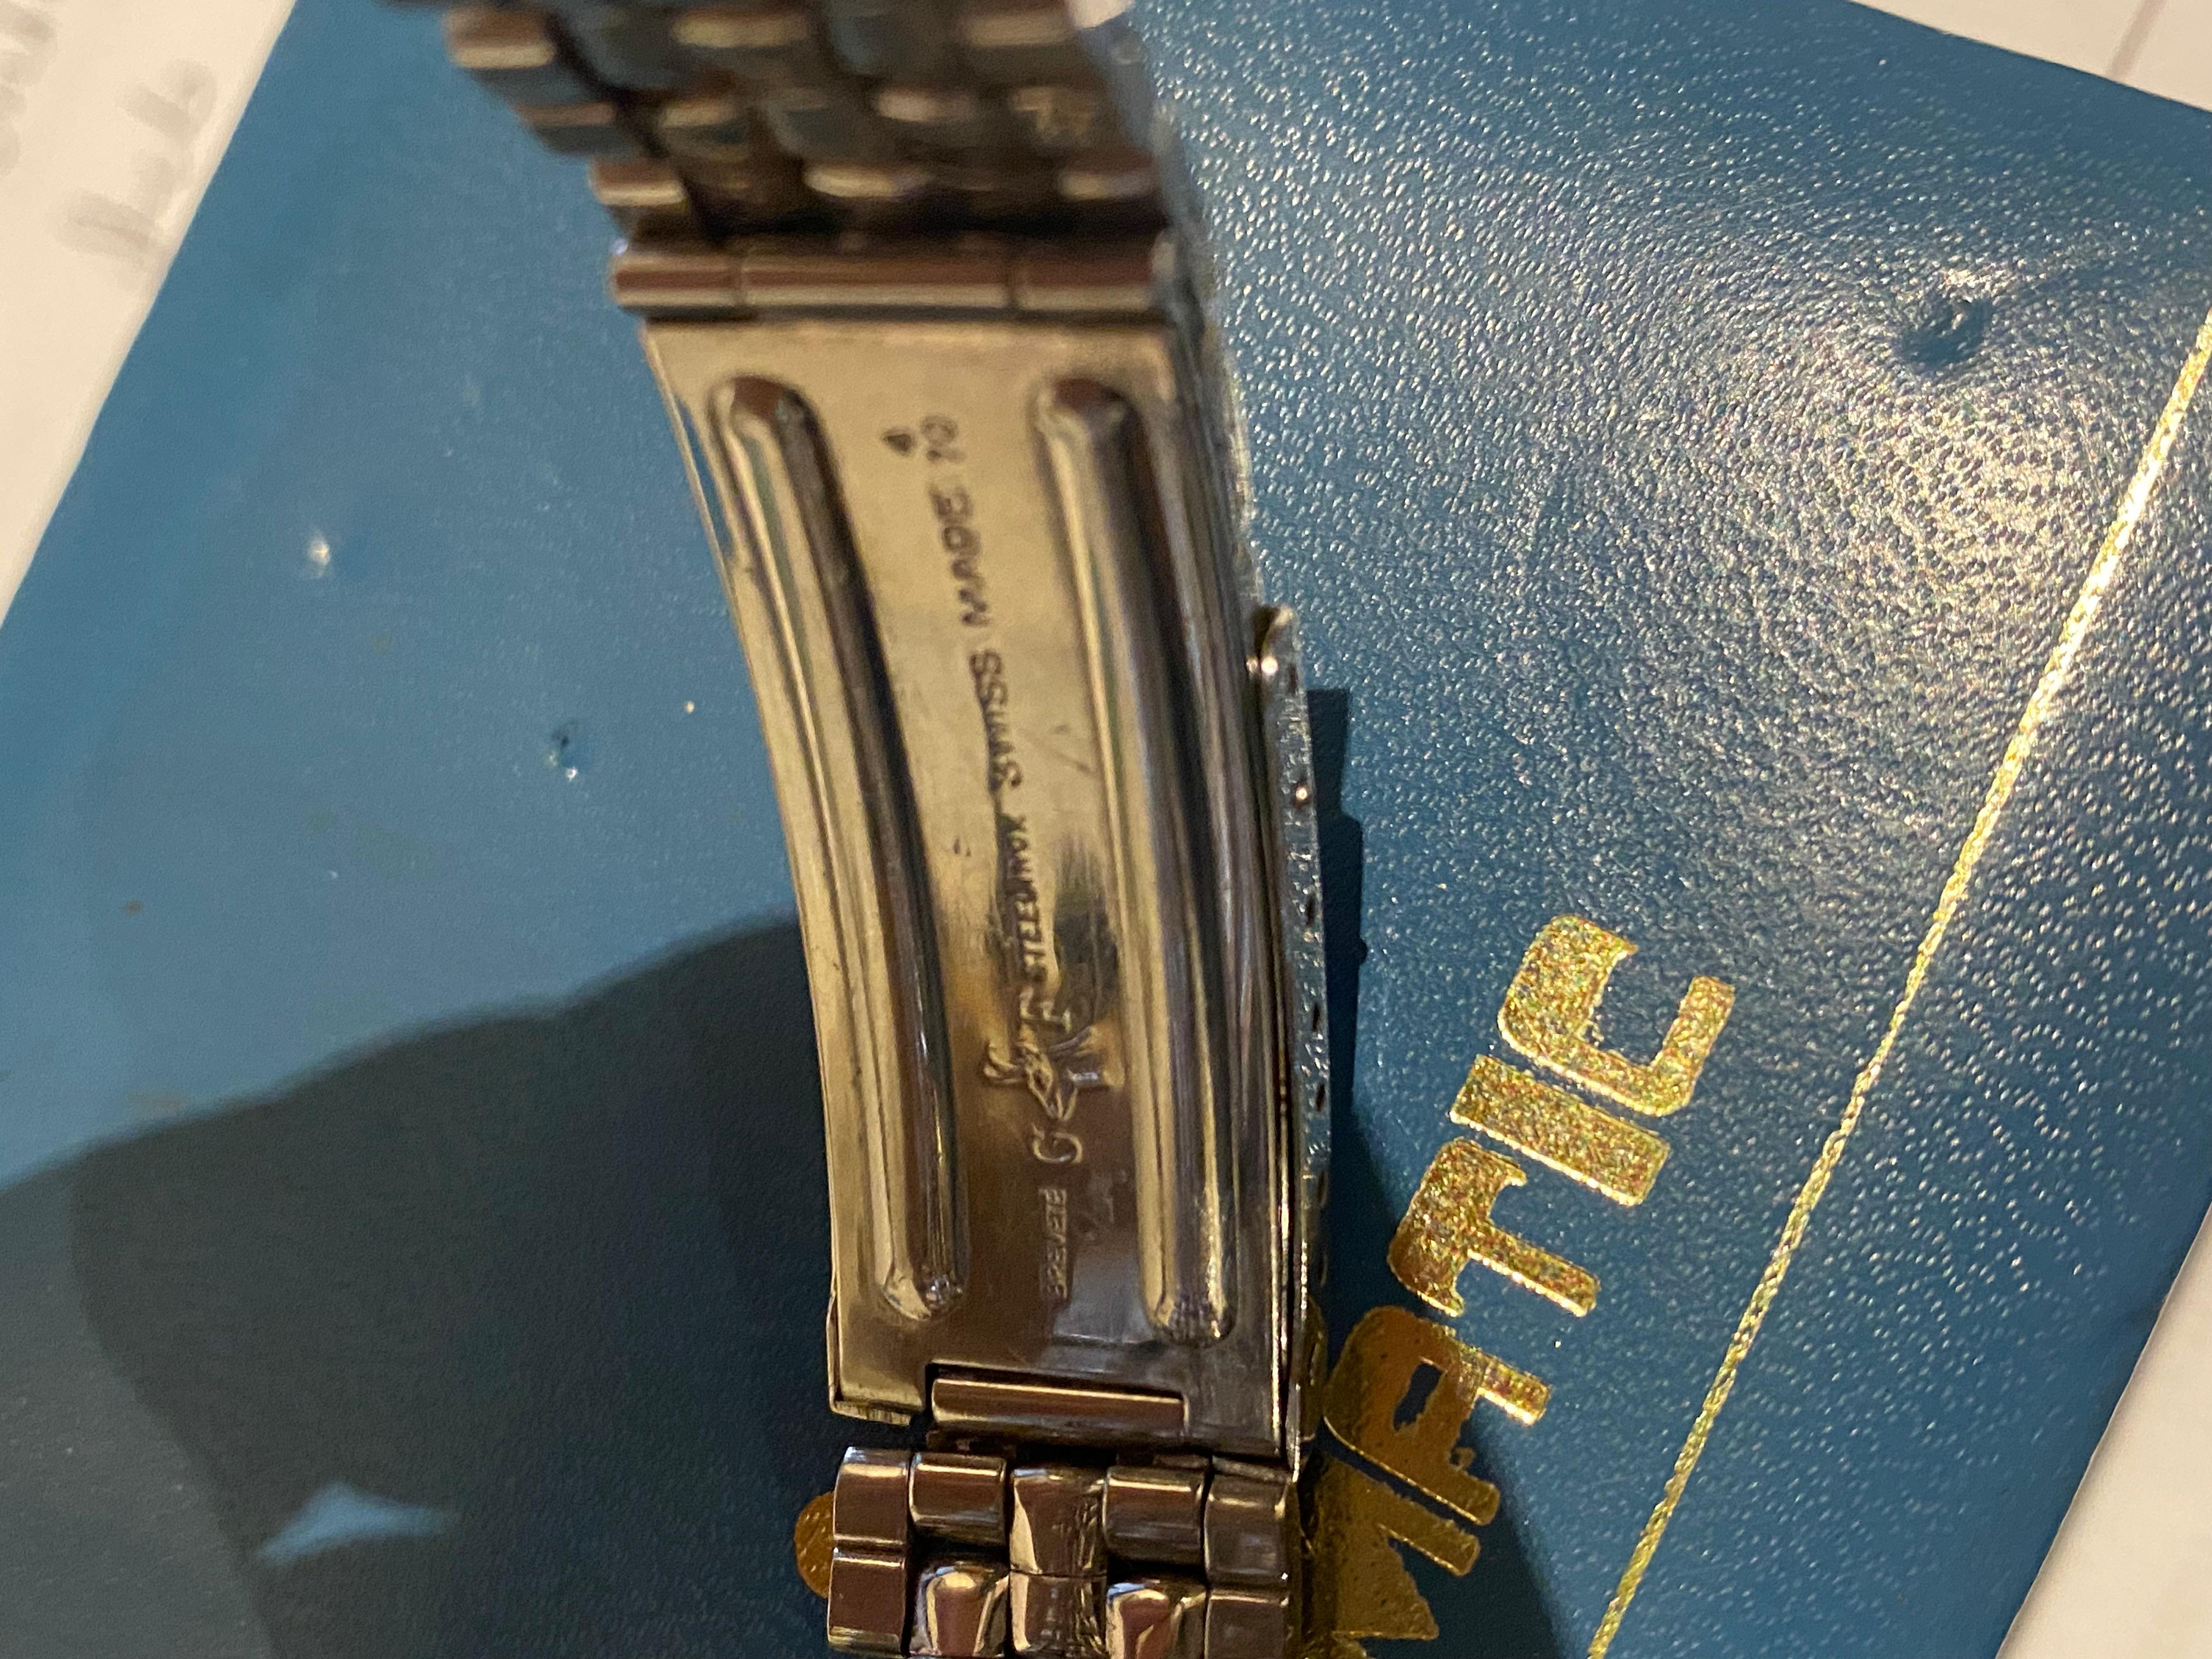 Eterna-matic KonTiki 20 c1968 Automatic Watch, Gay Freres Eterna Bracelet + Box In Good Condition For Sale In MELBOURNE, AU